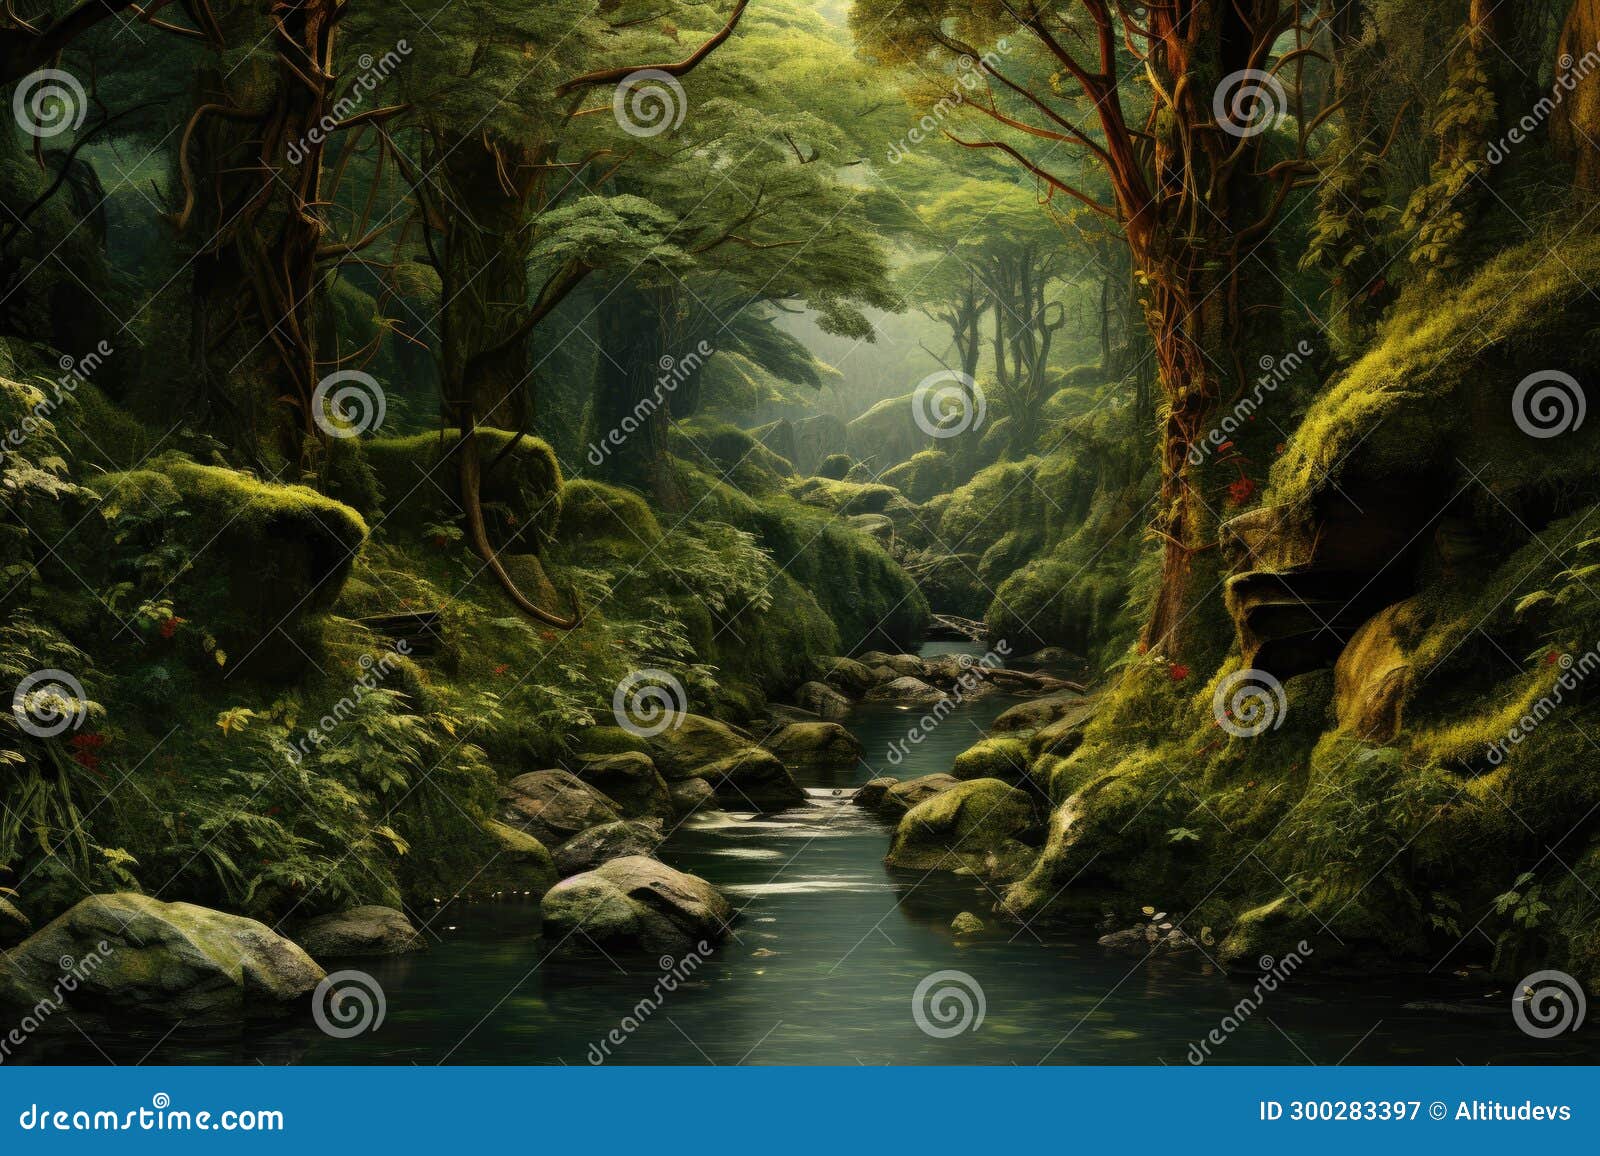 diminutive forest with river winding through it